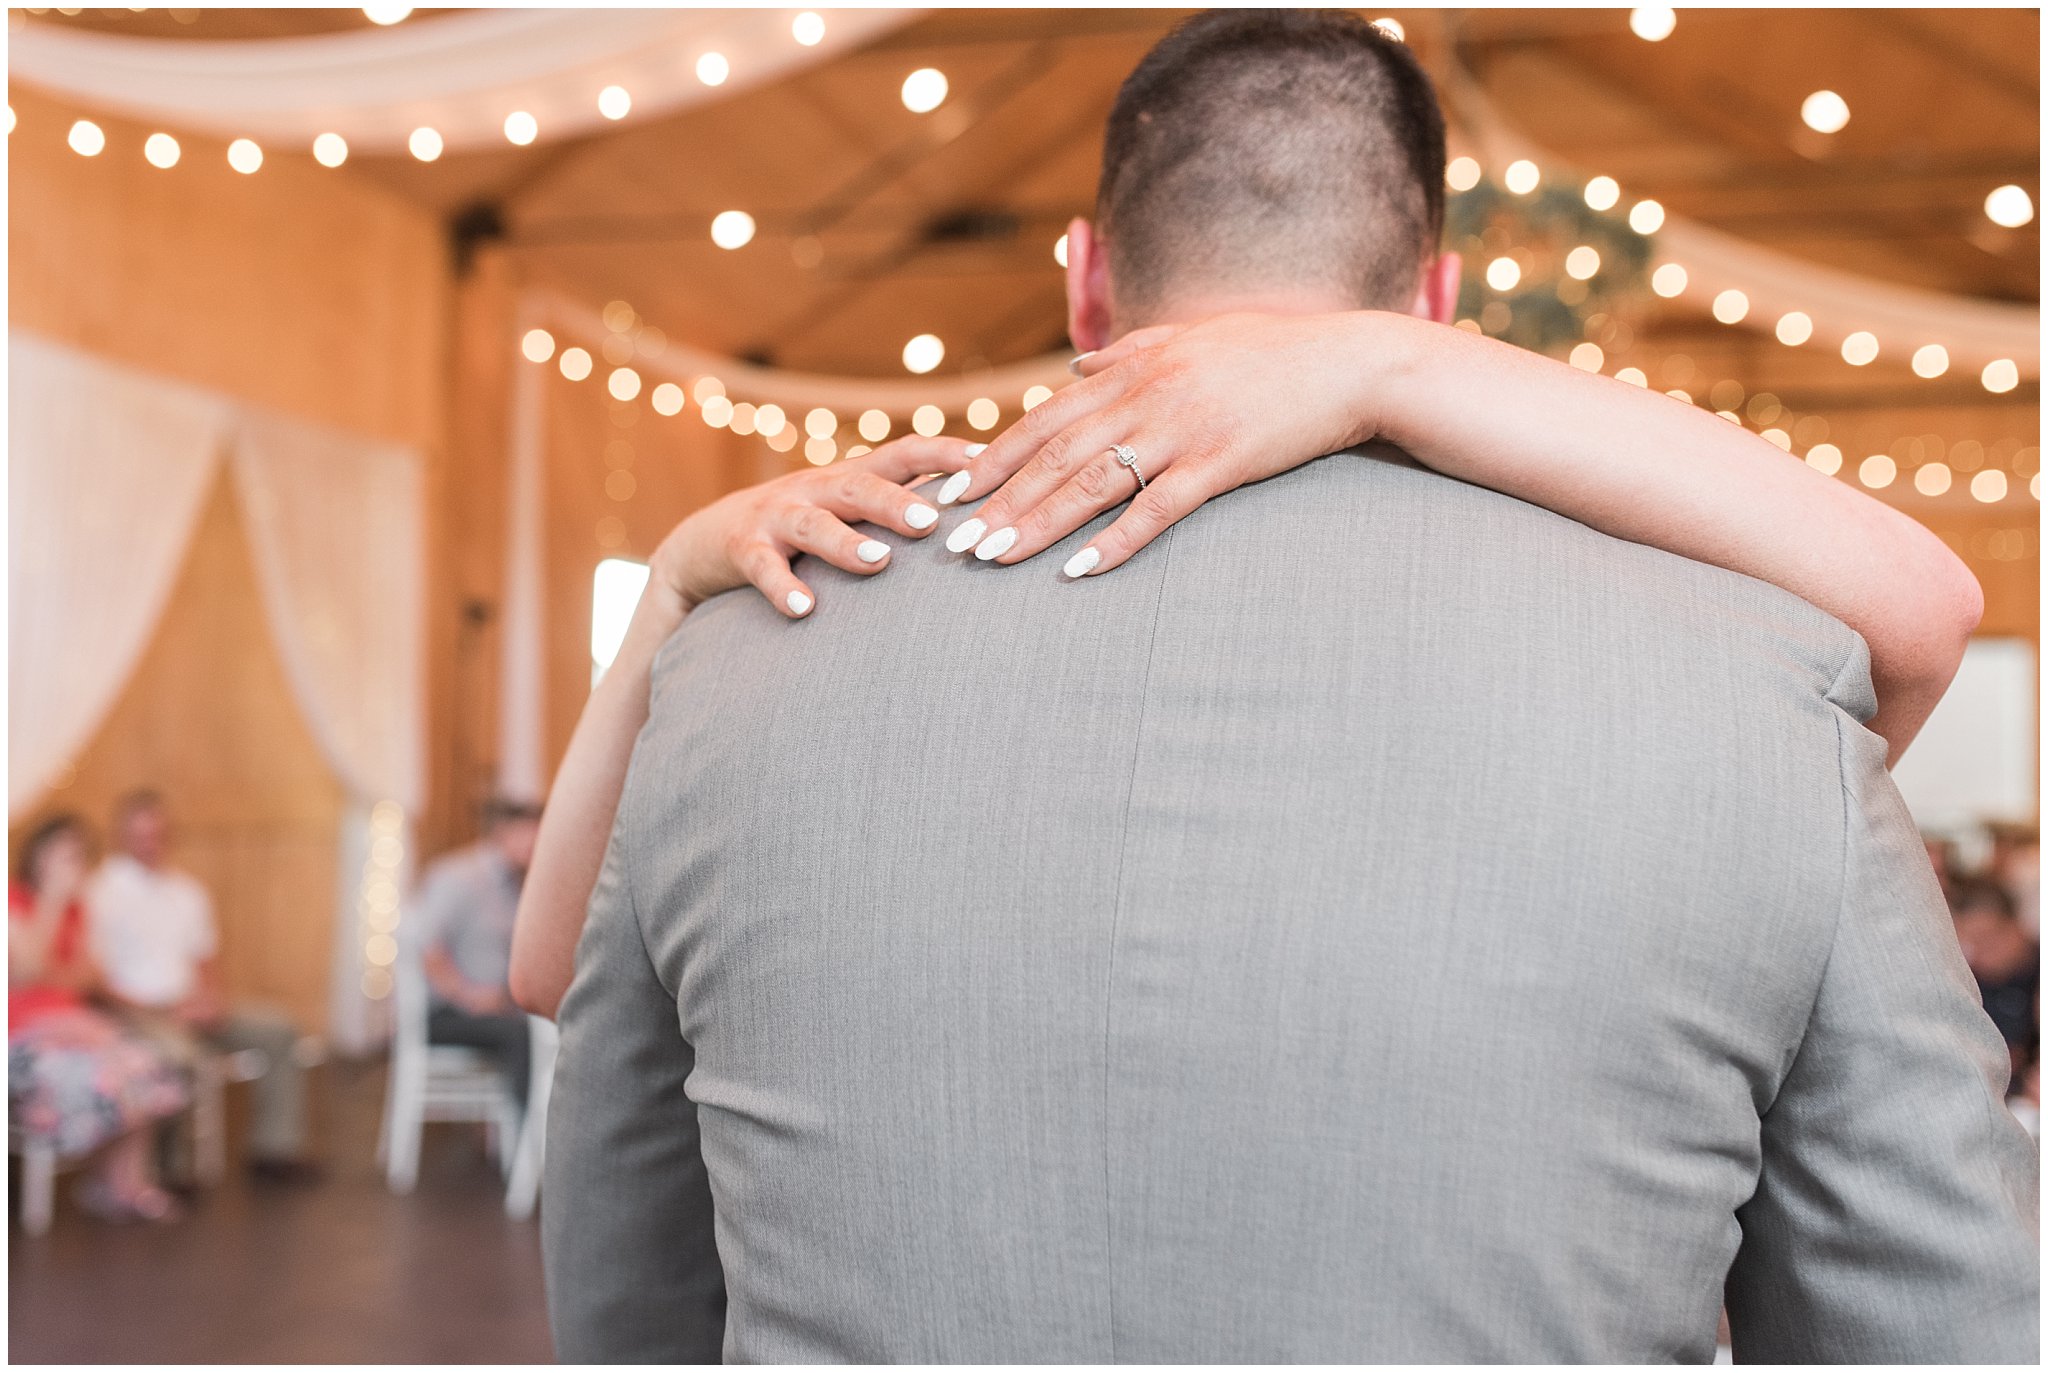 Bride and groom first dance during Oak Hills wedding in the barn | Sage Green and Gray Summer Wedding at Oak Hills | Jessie and Dallin Photography